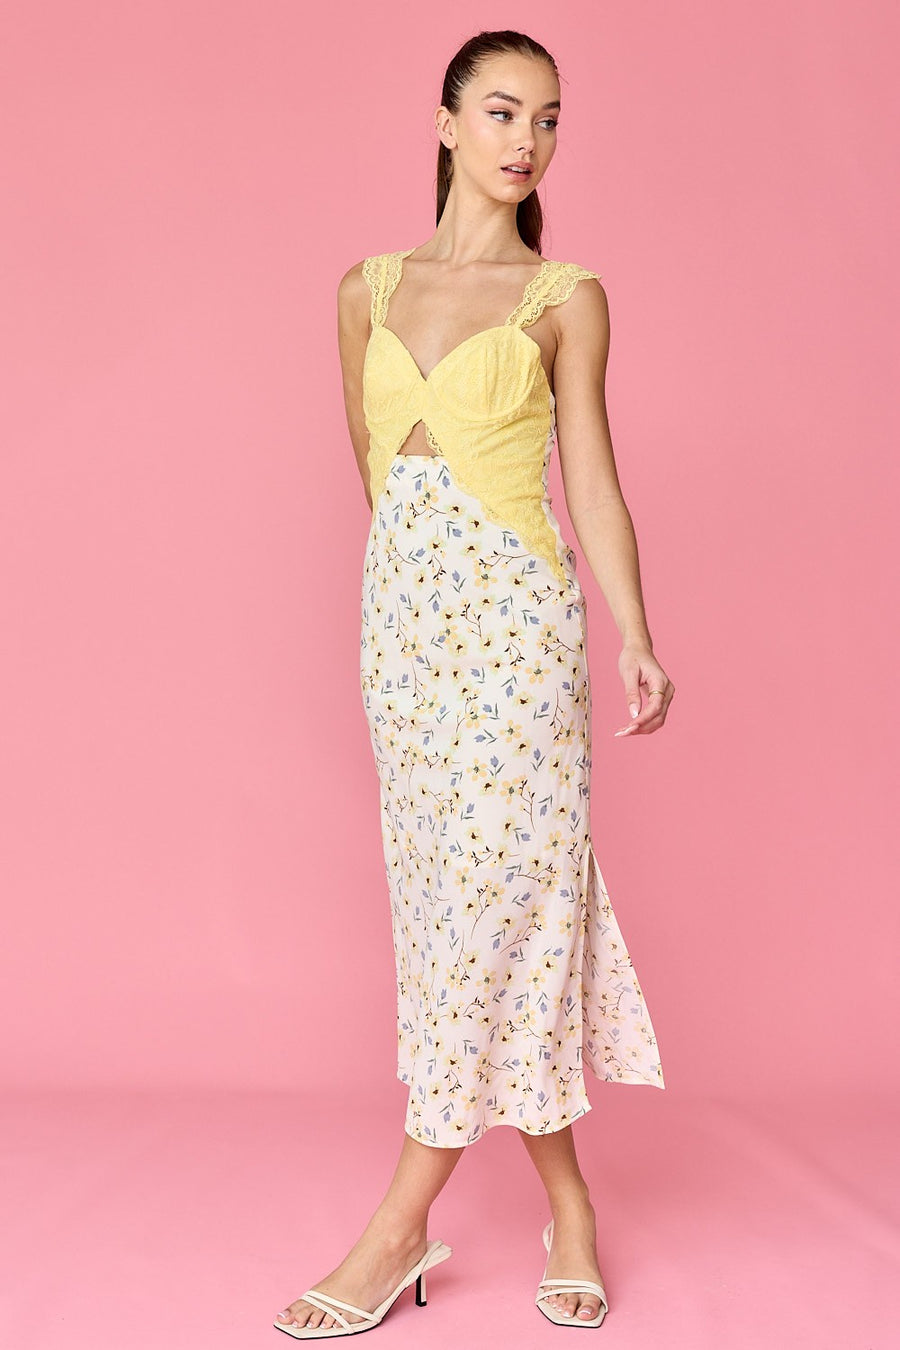 Featuring a floral pattern midi dress with yellow lace detailing and a cutout design.